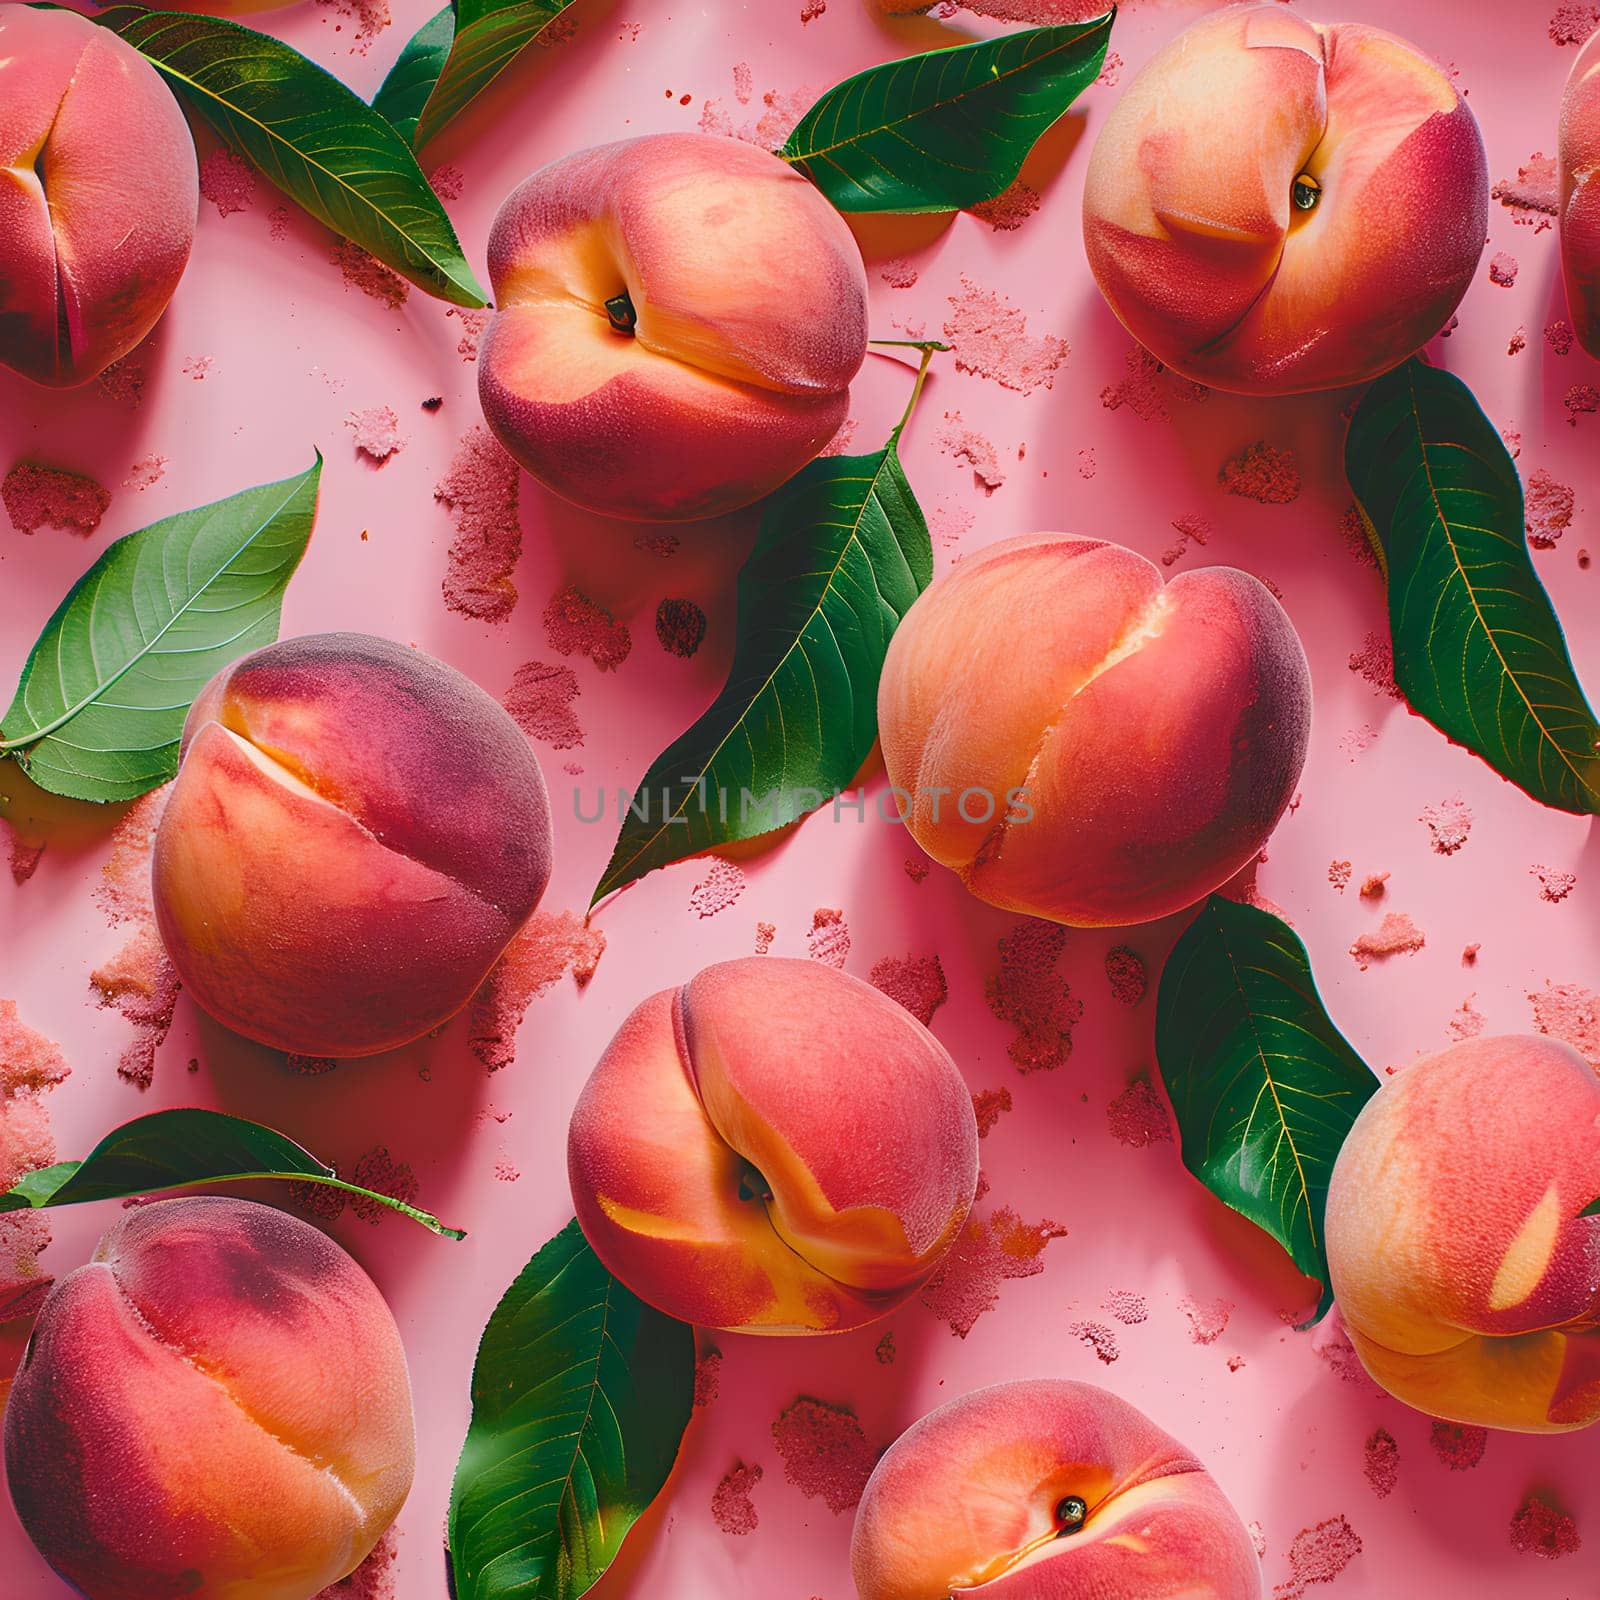 Natural foods peaches with green leaves on a pink surface by Nadtochiy